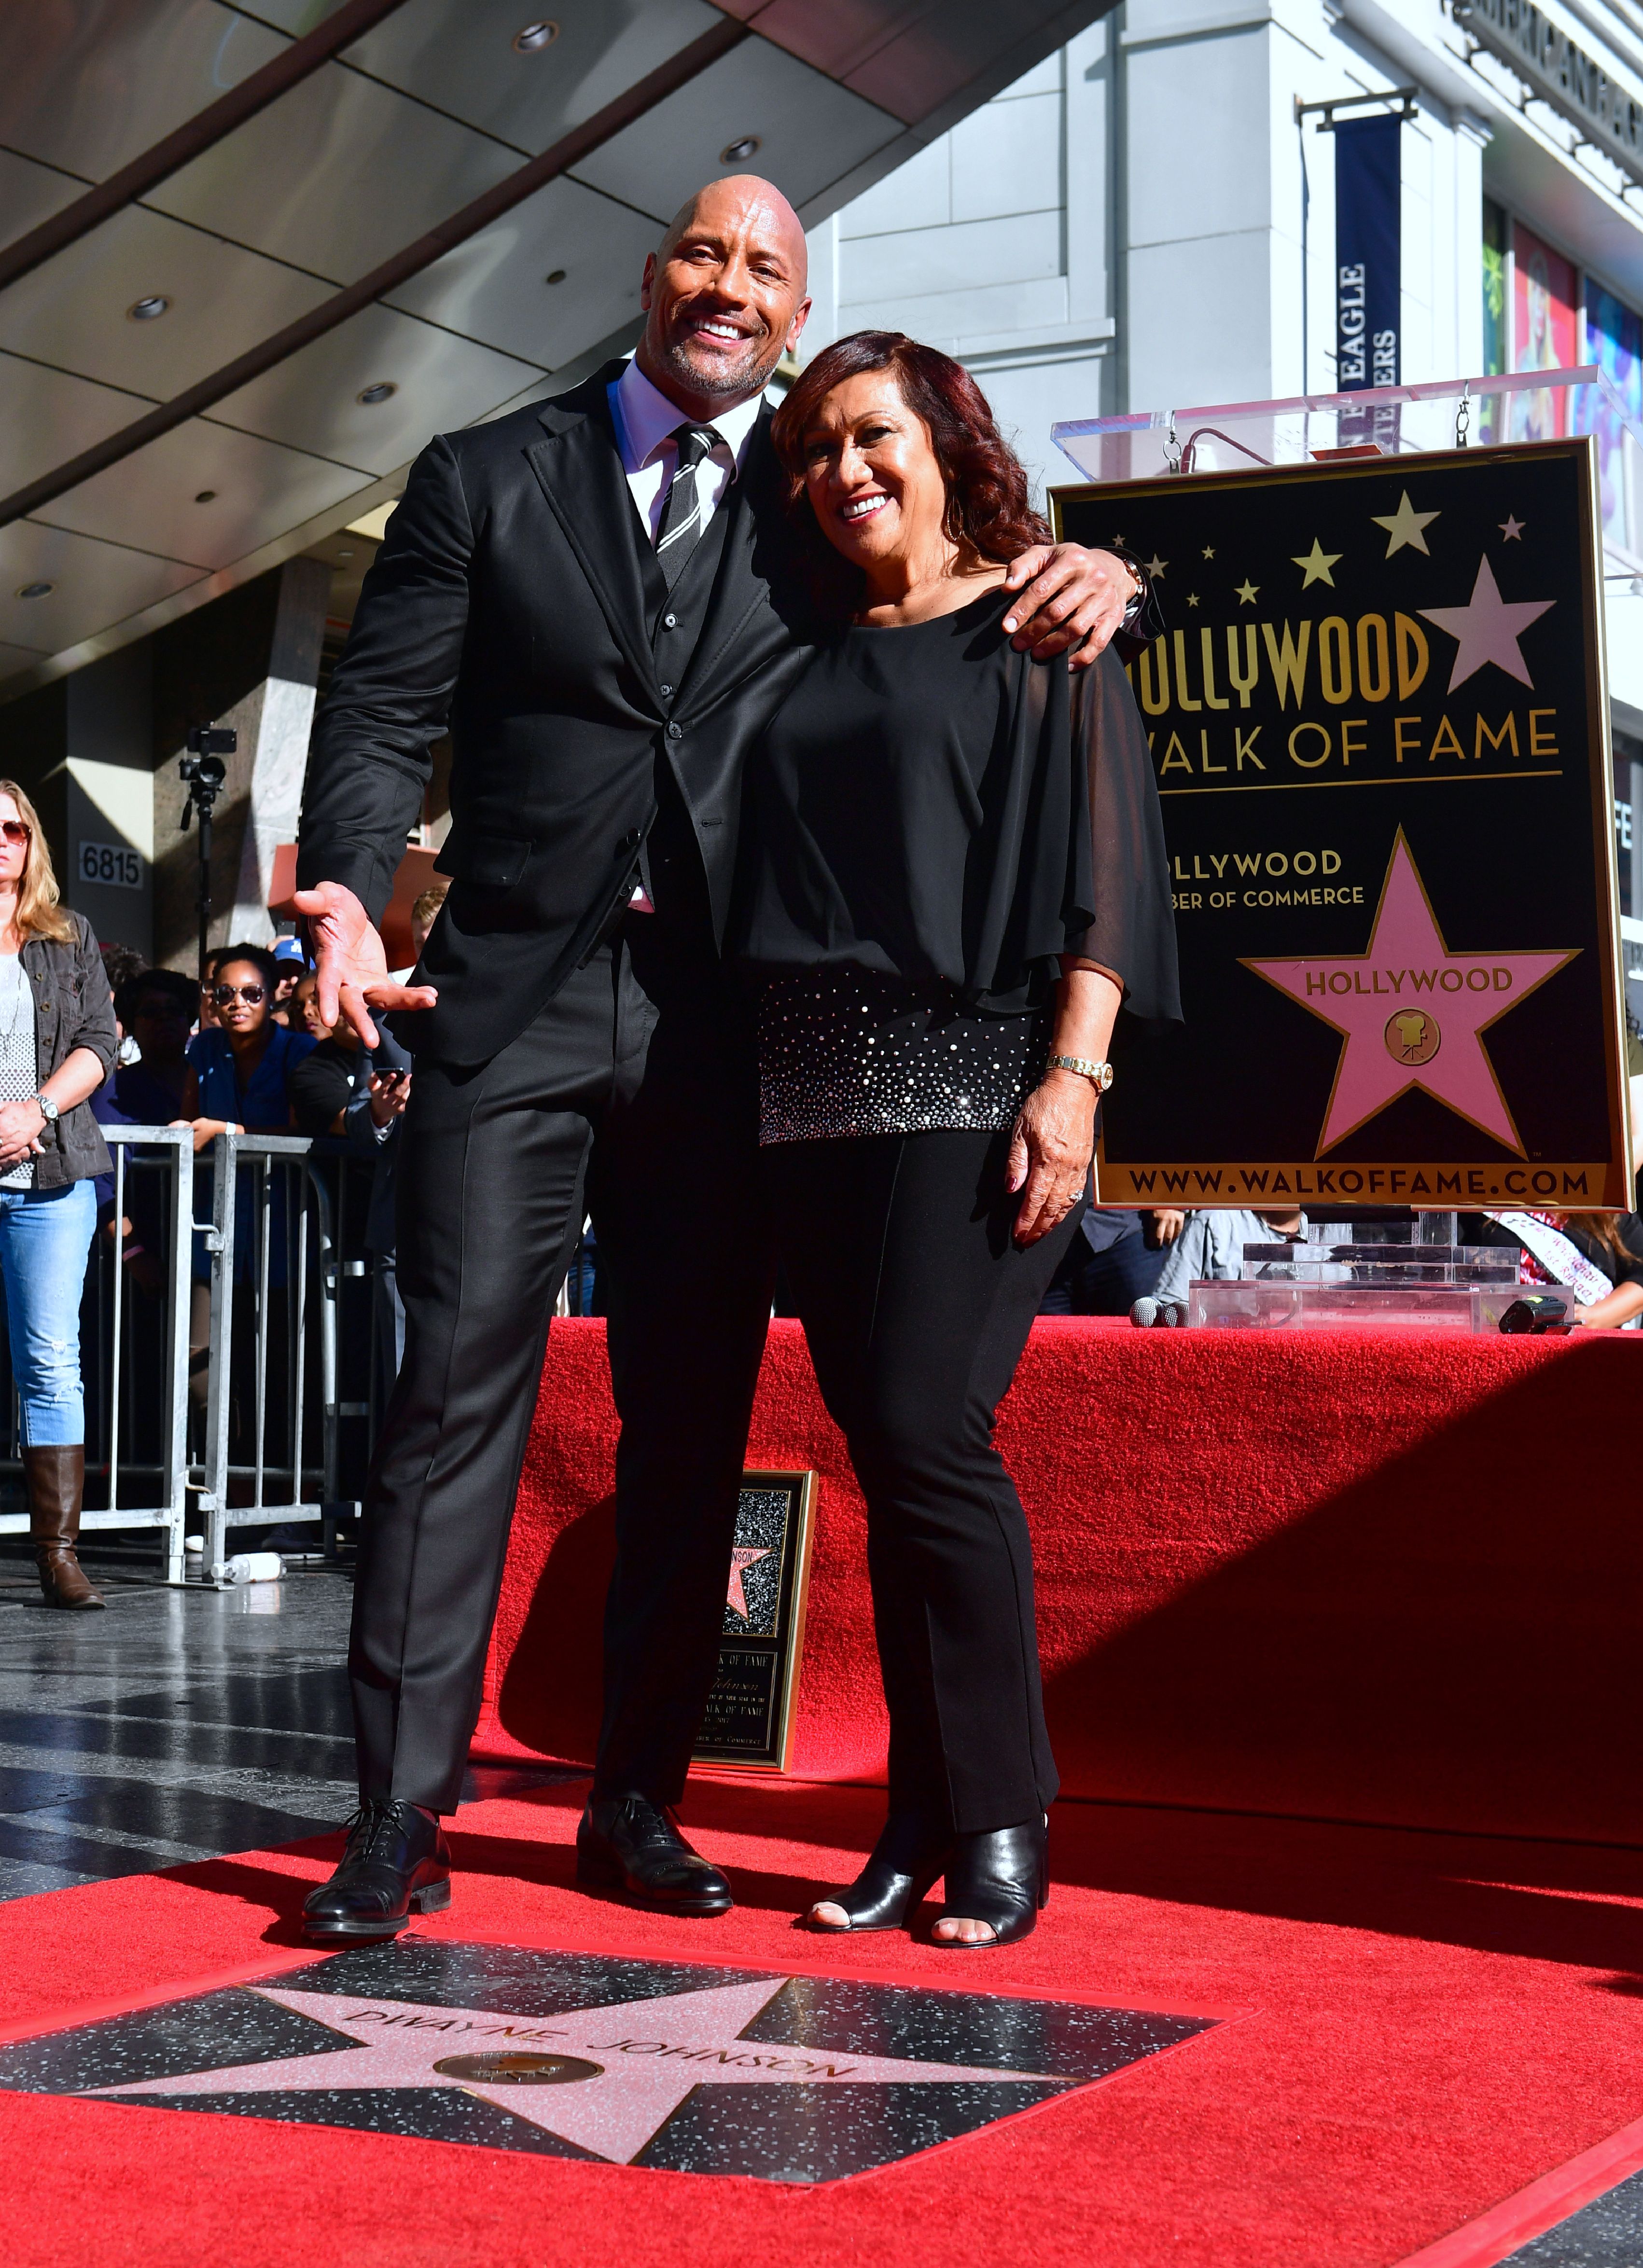 Dwayne Johnson poses with his mother, Ata Johnson, at his Hollywood Walk of Fame Star ceremony in Hollywood, California on December 13, 2017. | Source: Getty Images